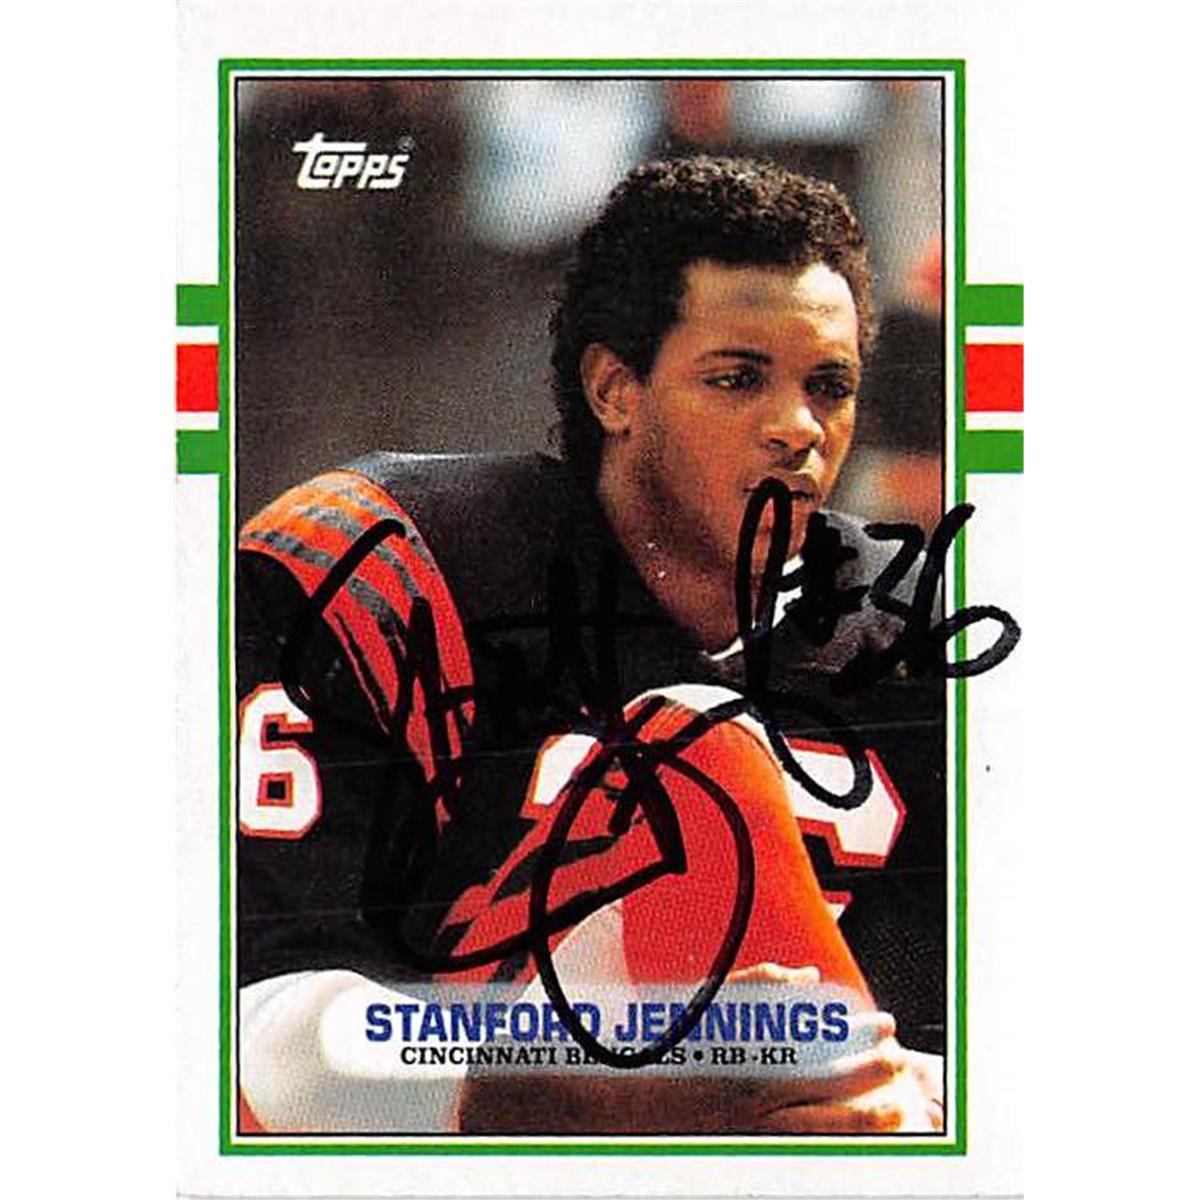 Picture of Autograph Warehouse 377224 Stanford Jennings Autographed Football Card - Cincinnati Bengals 1990 Topps No.38